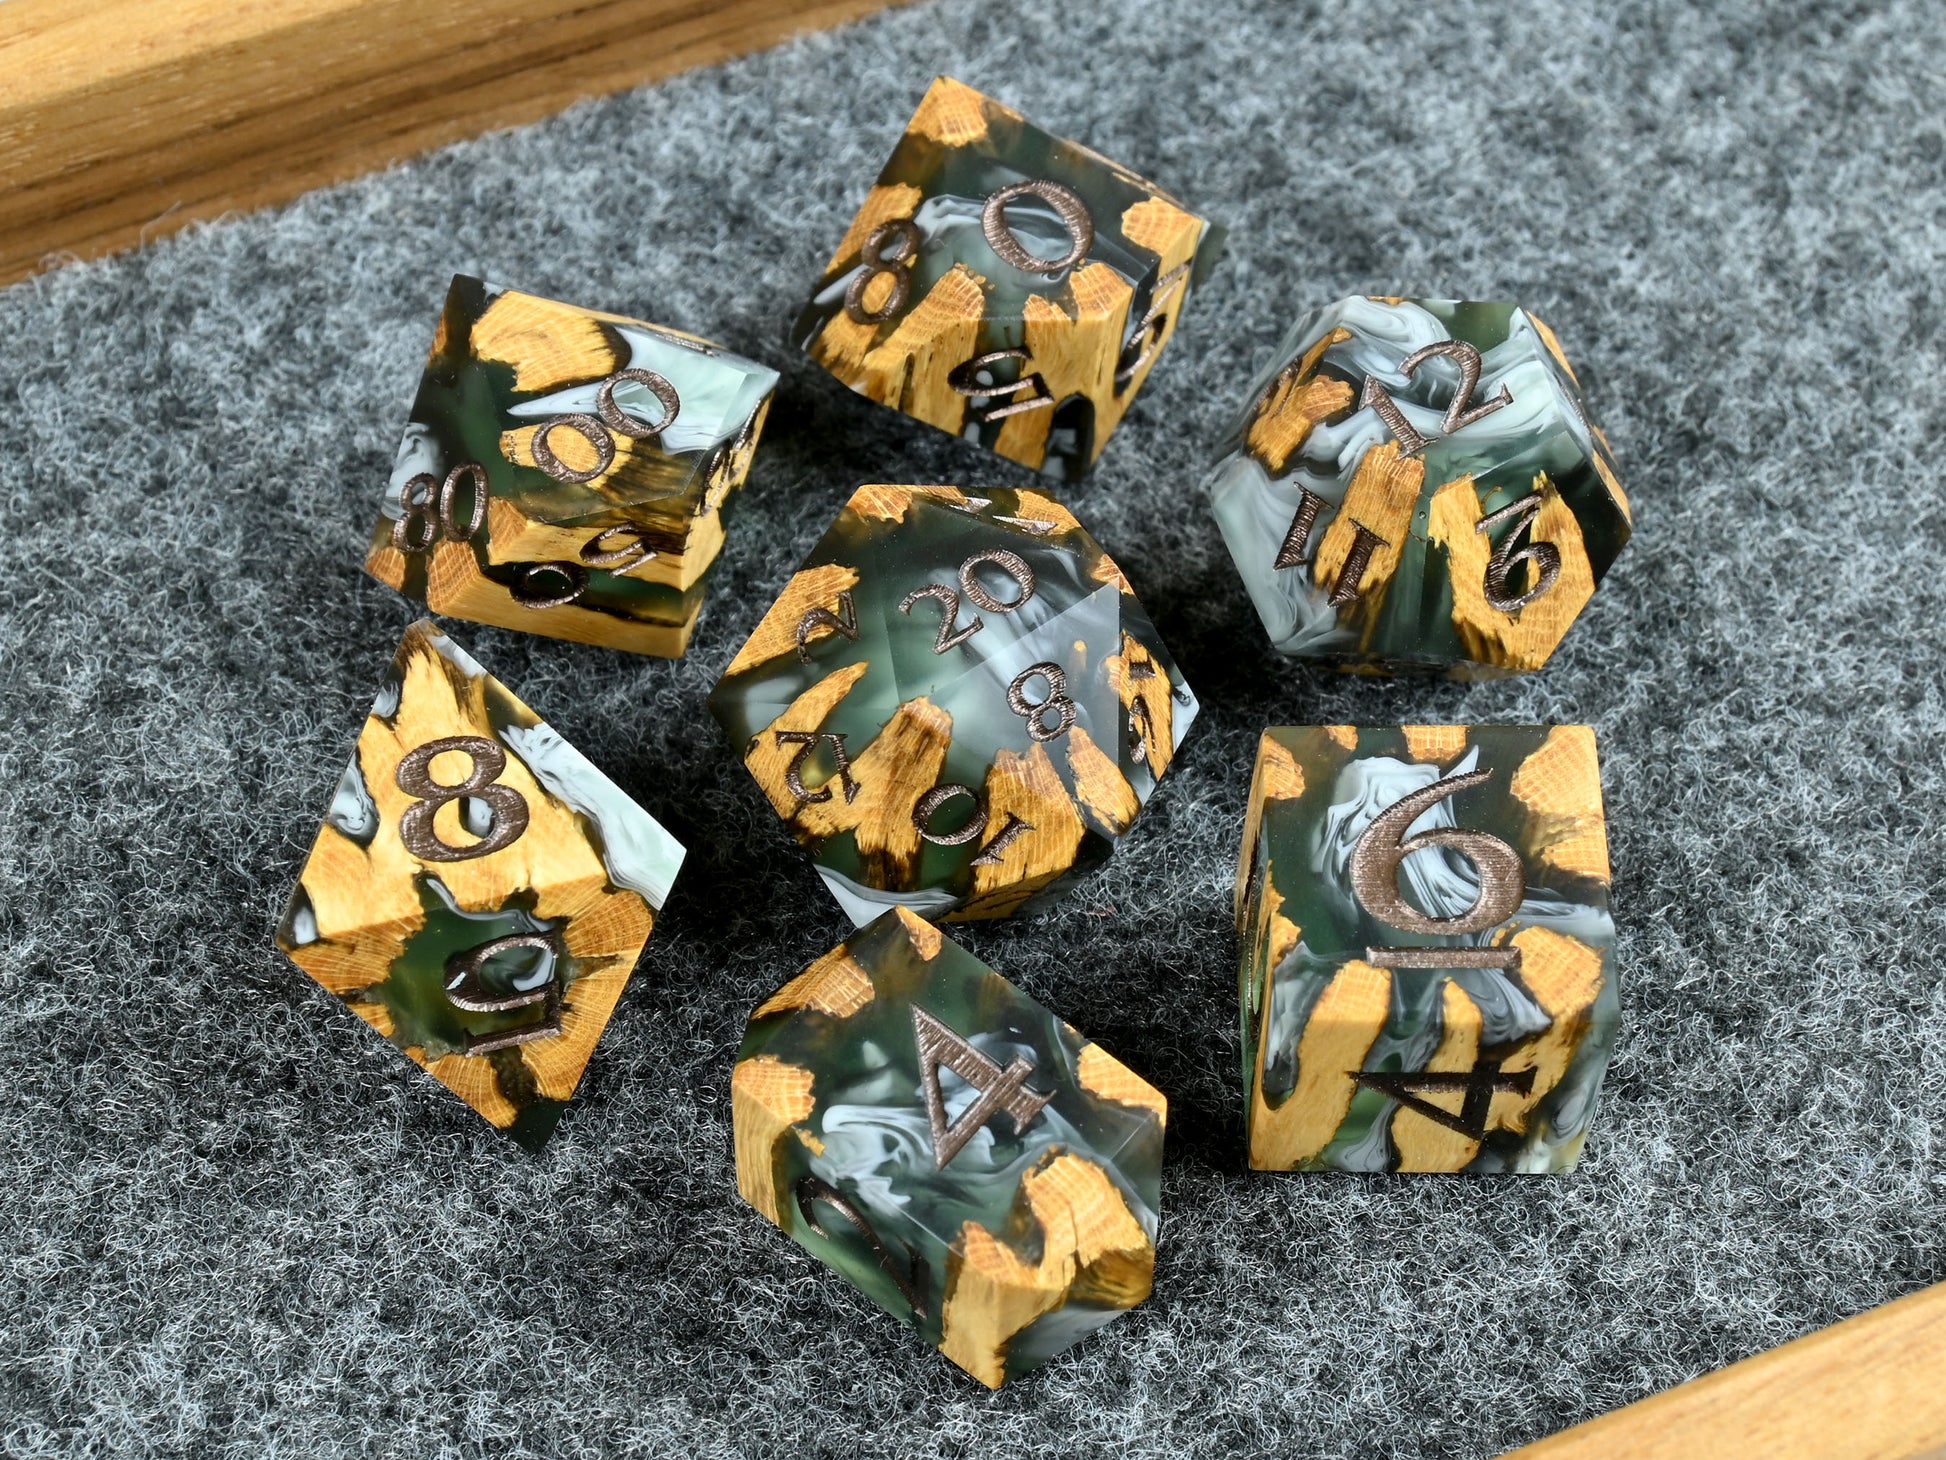 Creeping rot cholla wood and resin hybrid dice set for D&D ttrpg.